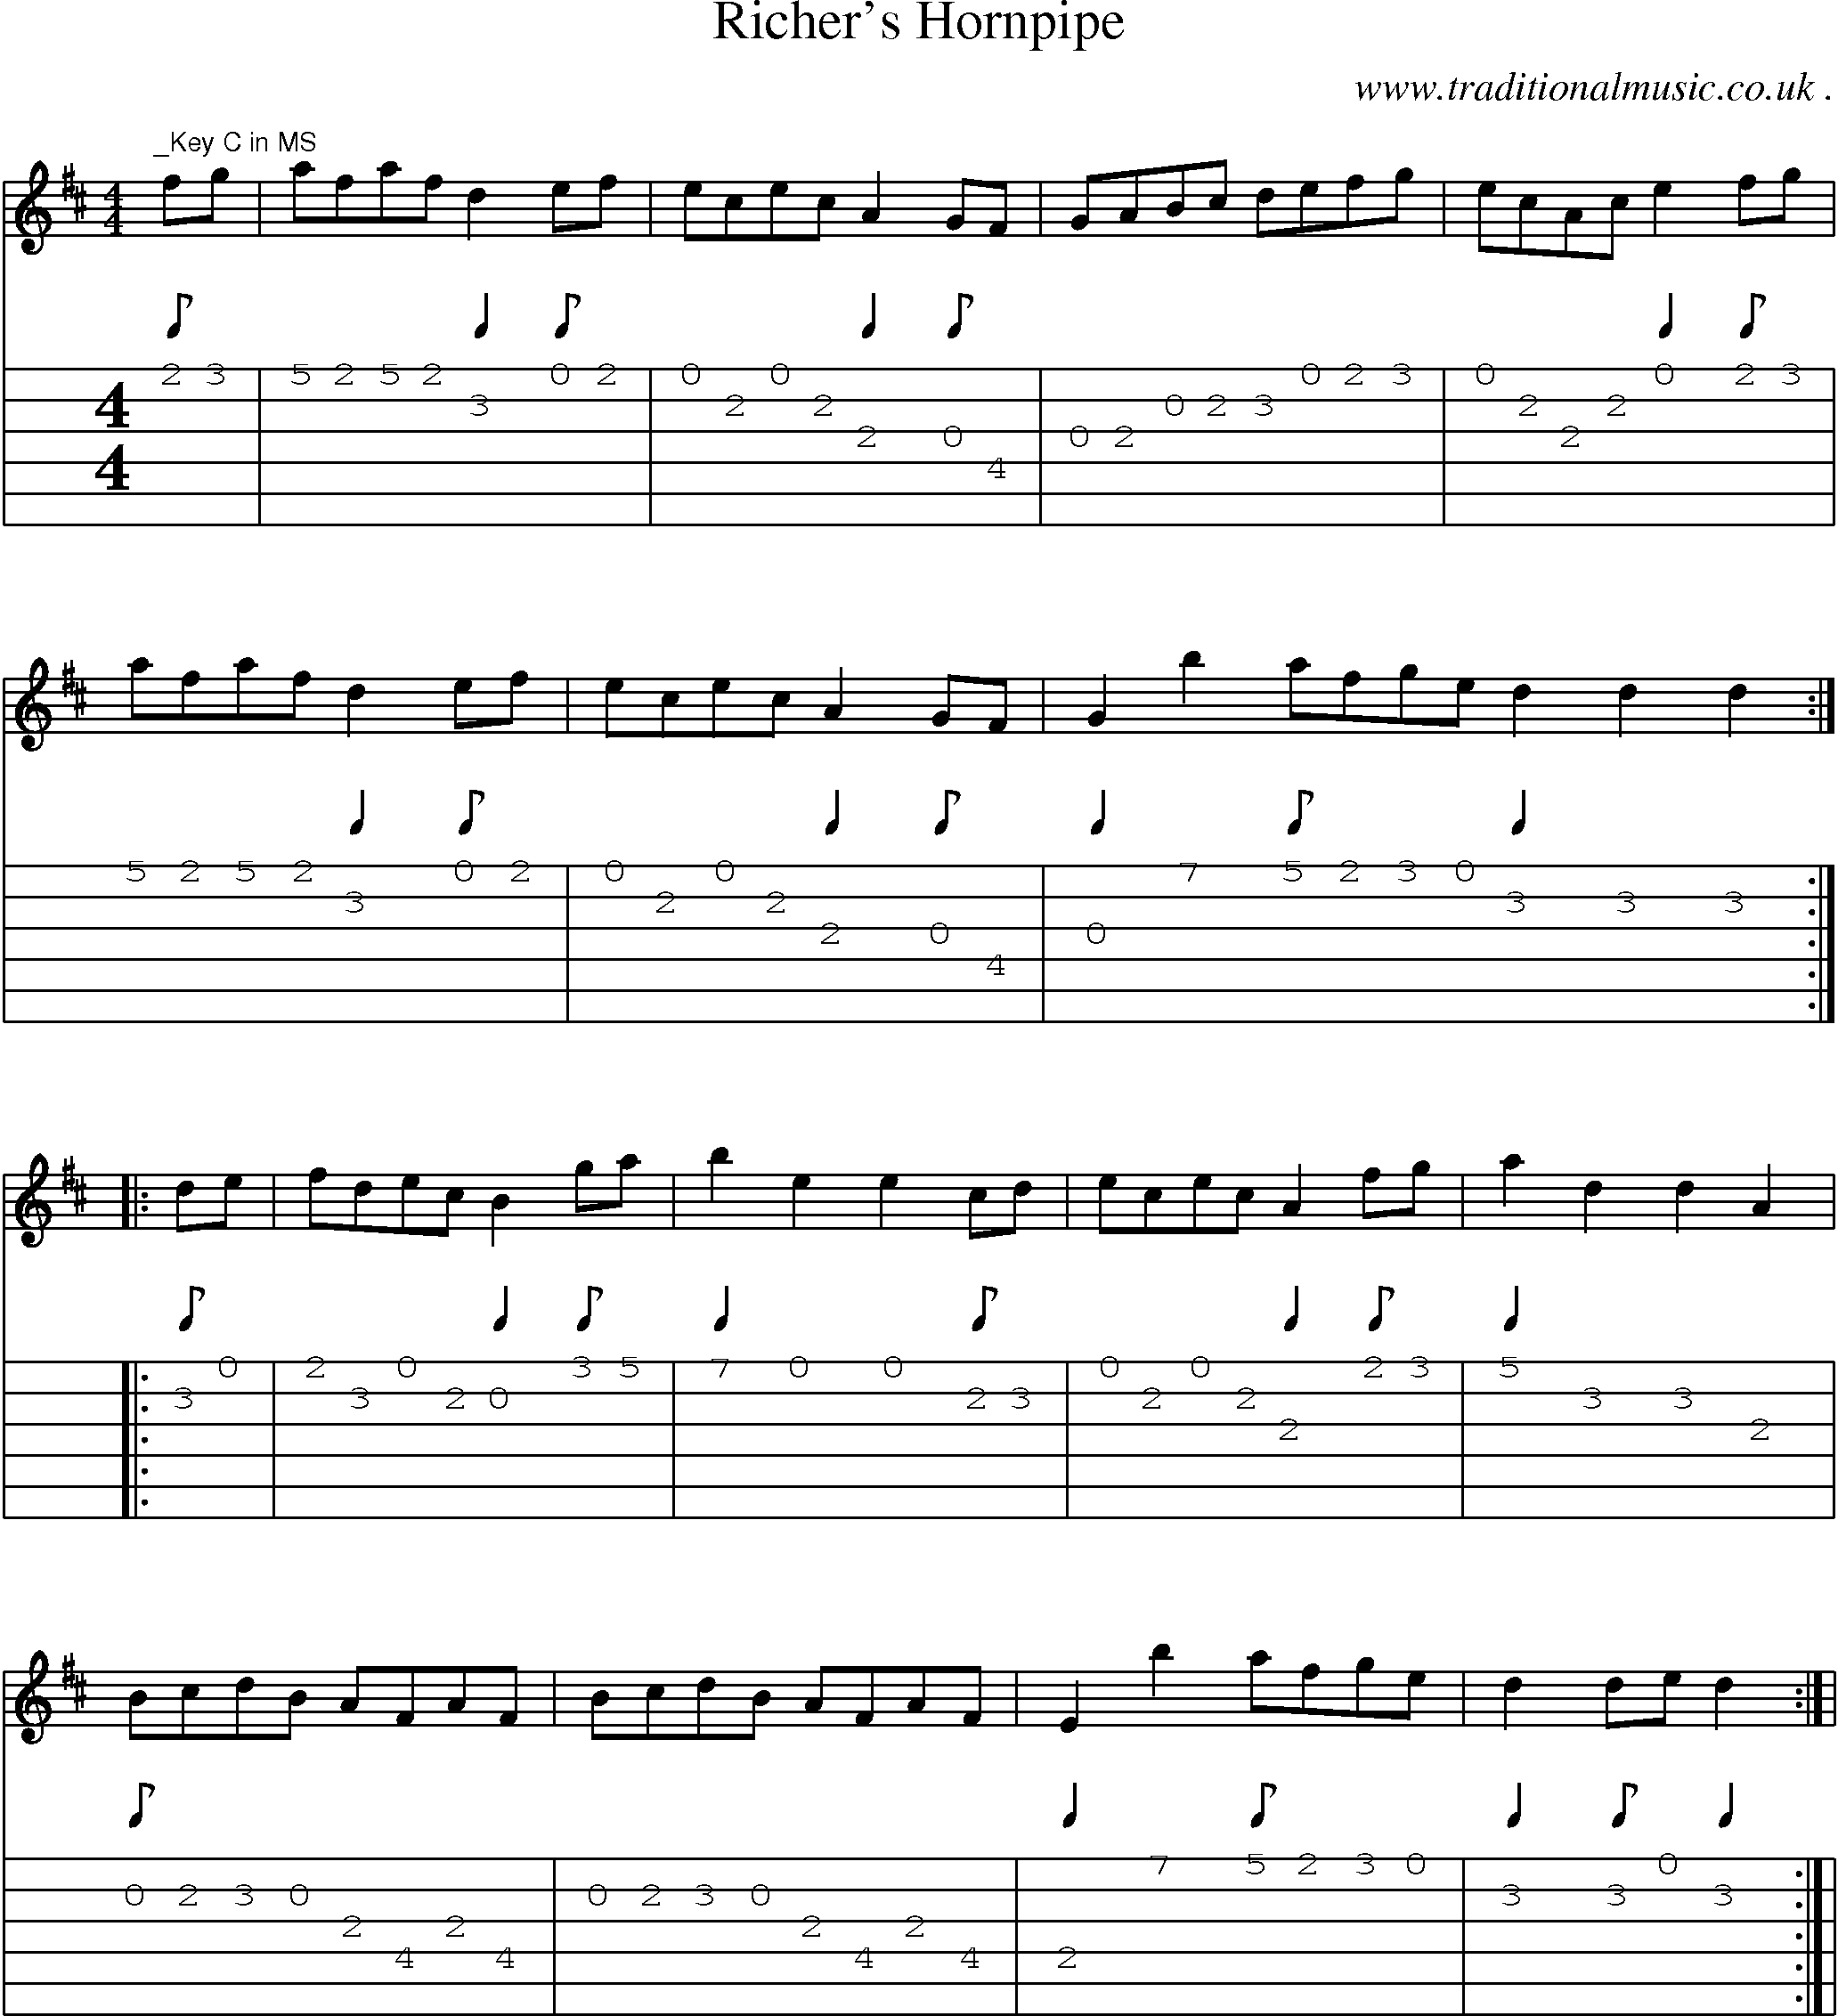 Sheet-Music and Guitar Tabs for Richers Hornpipe